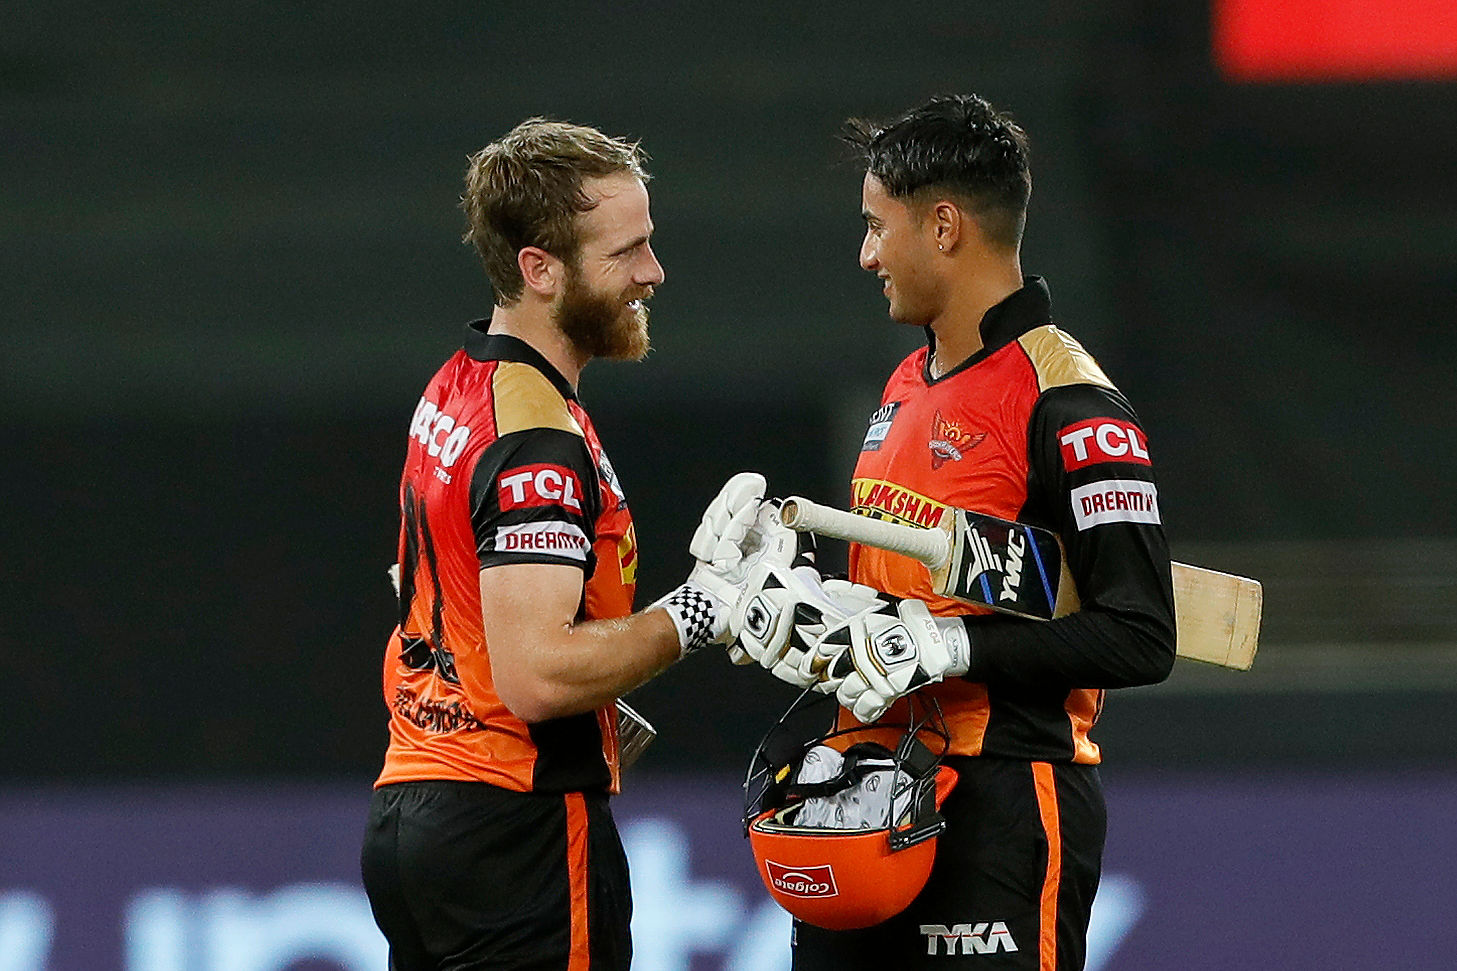 IPL 2021, SRH vs CSK: When and where to watch live telecast, streaming